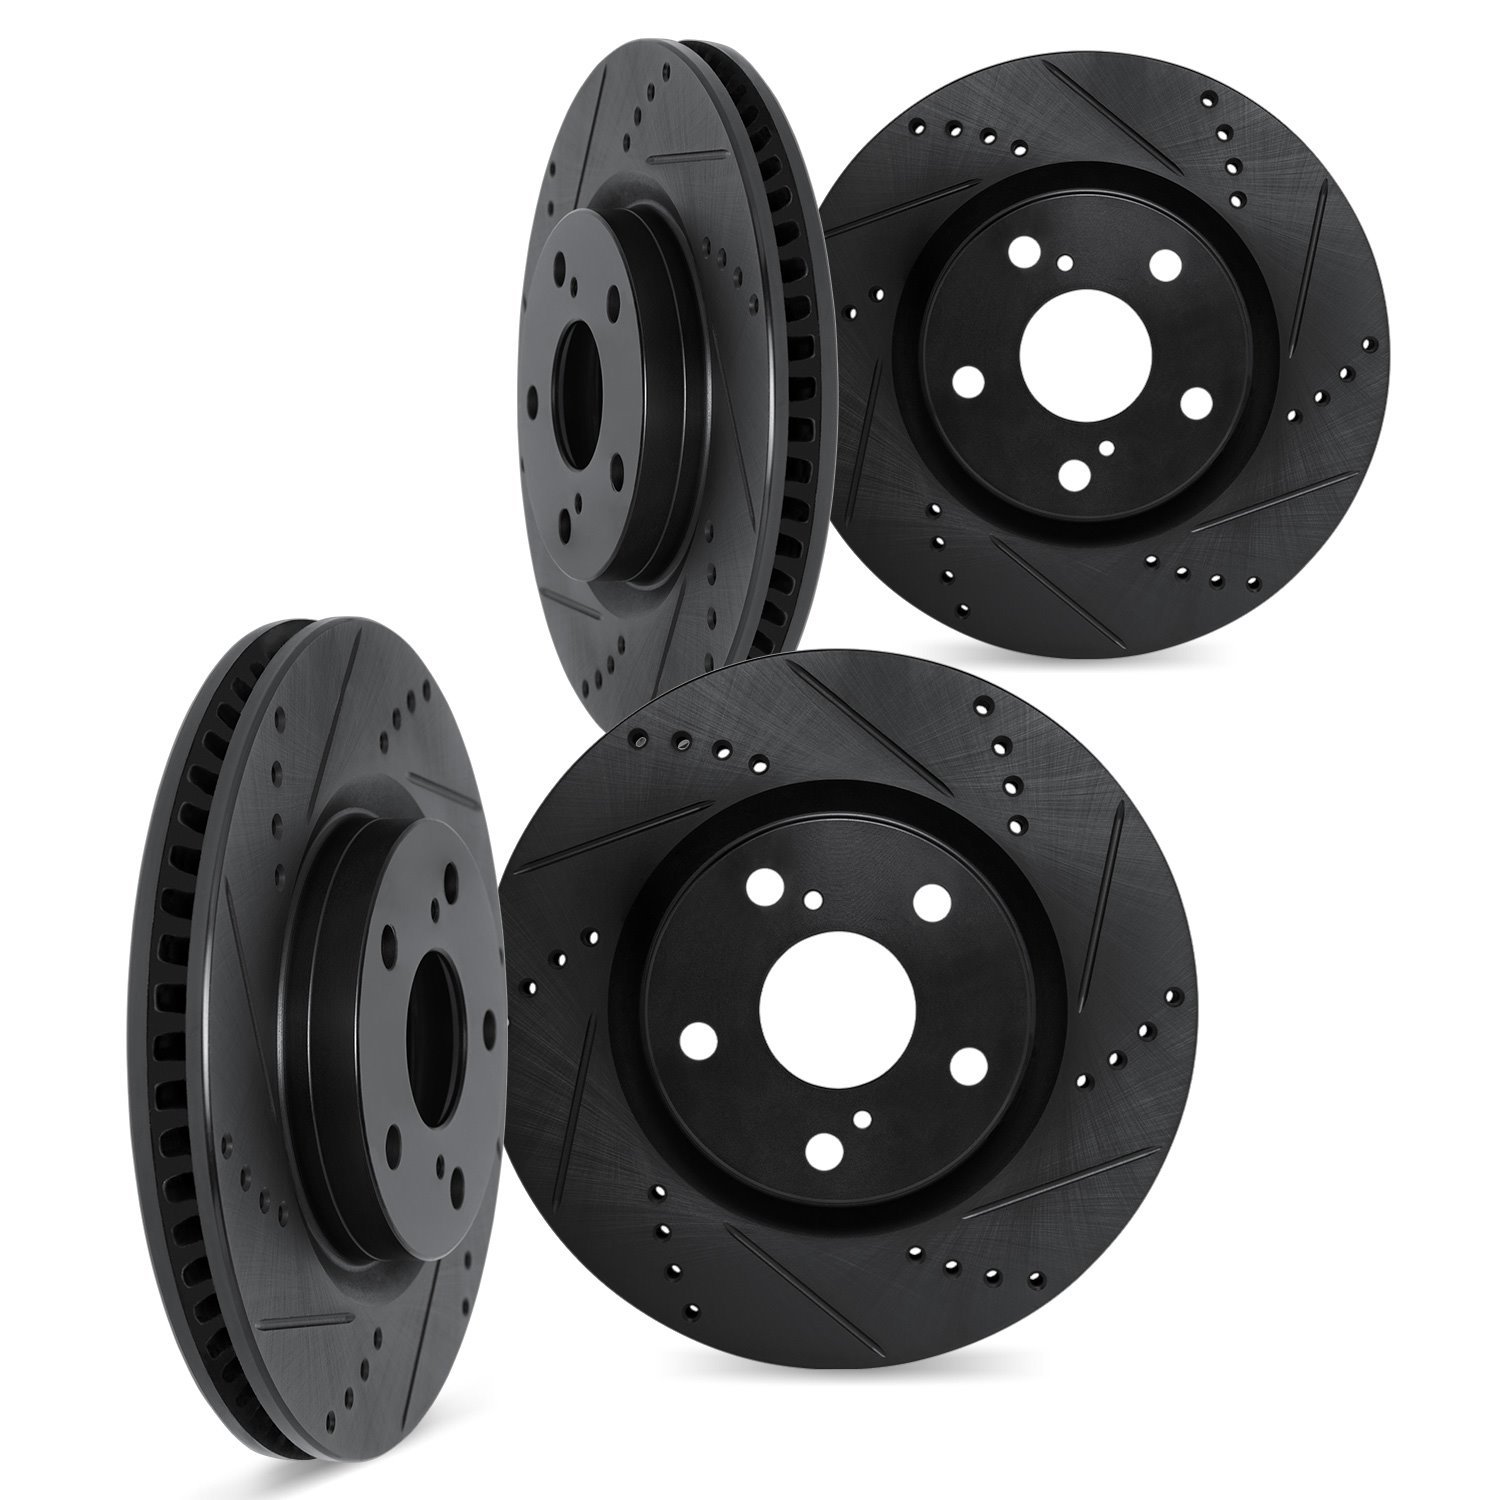 8004-67093 Drilled/Slotted Brake Rotors [Black], 2003-2004 Infiniti/Nissan, Position: Front and Rear